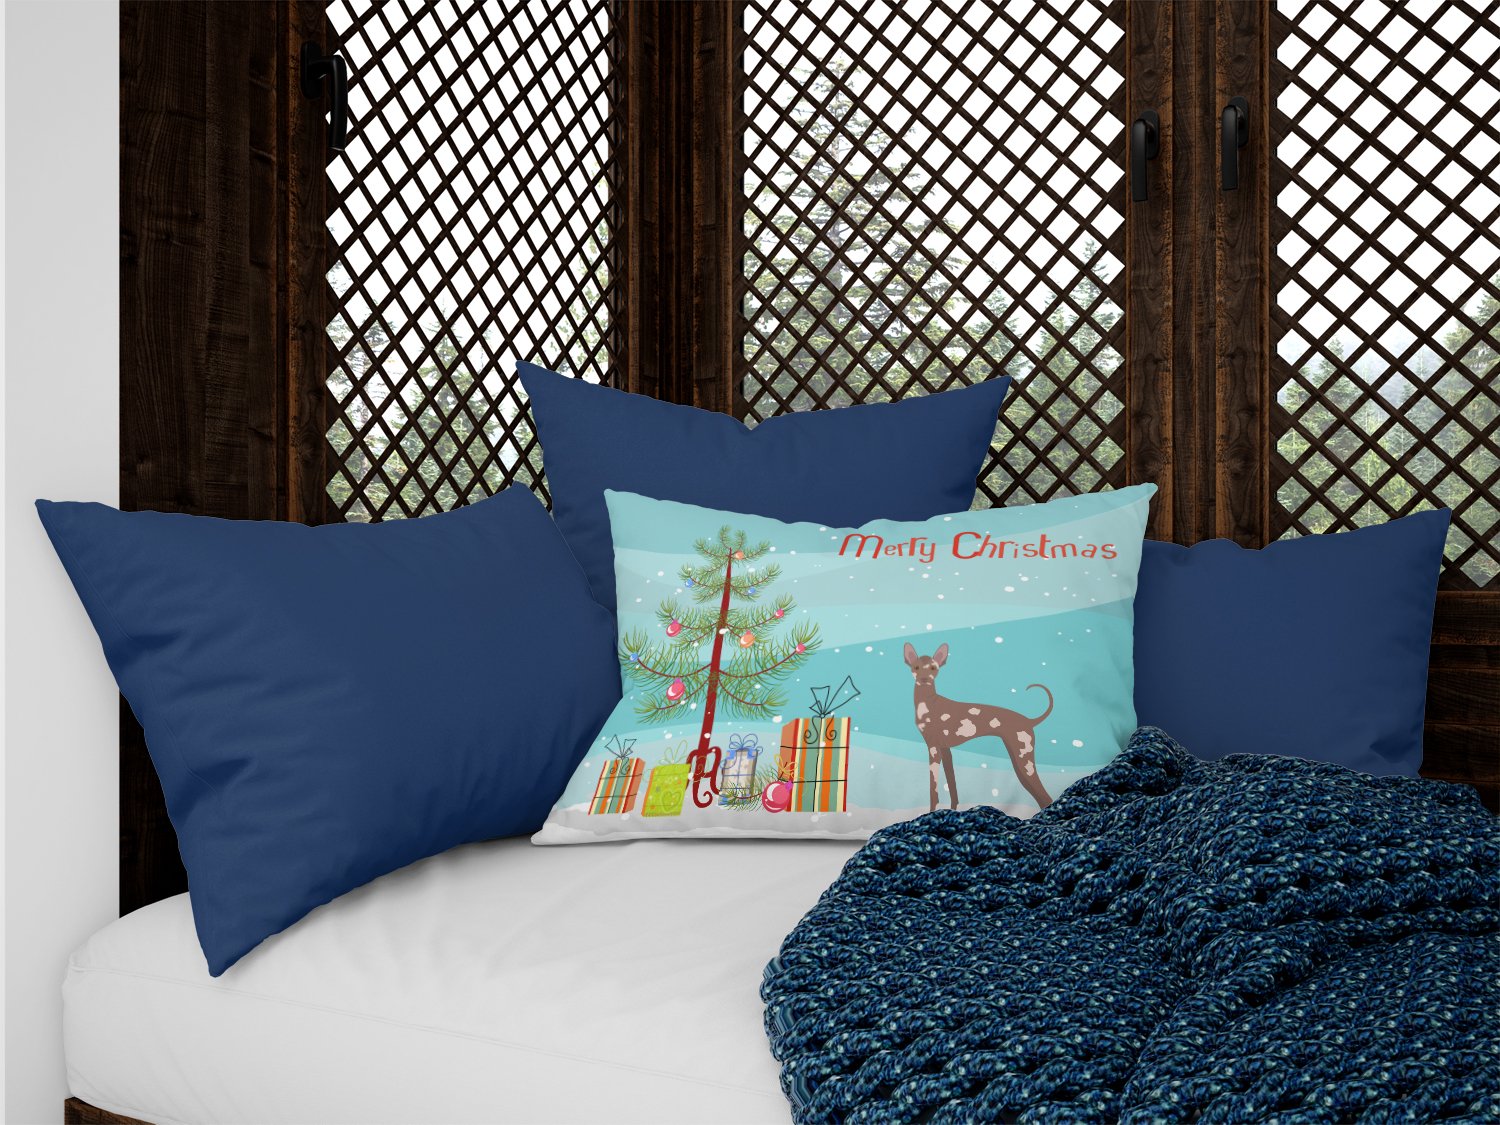 Mexican Hairless Dog Christmas Tree Canvas Fabric Decorative Pillow CK3473PW1216 by Caroline's Treasures